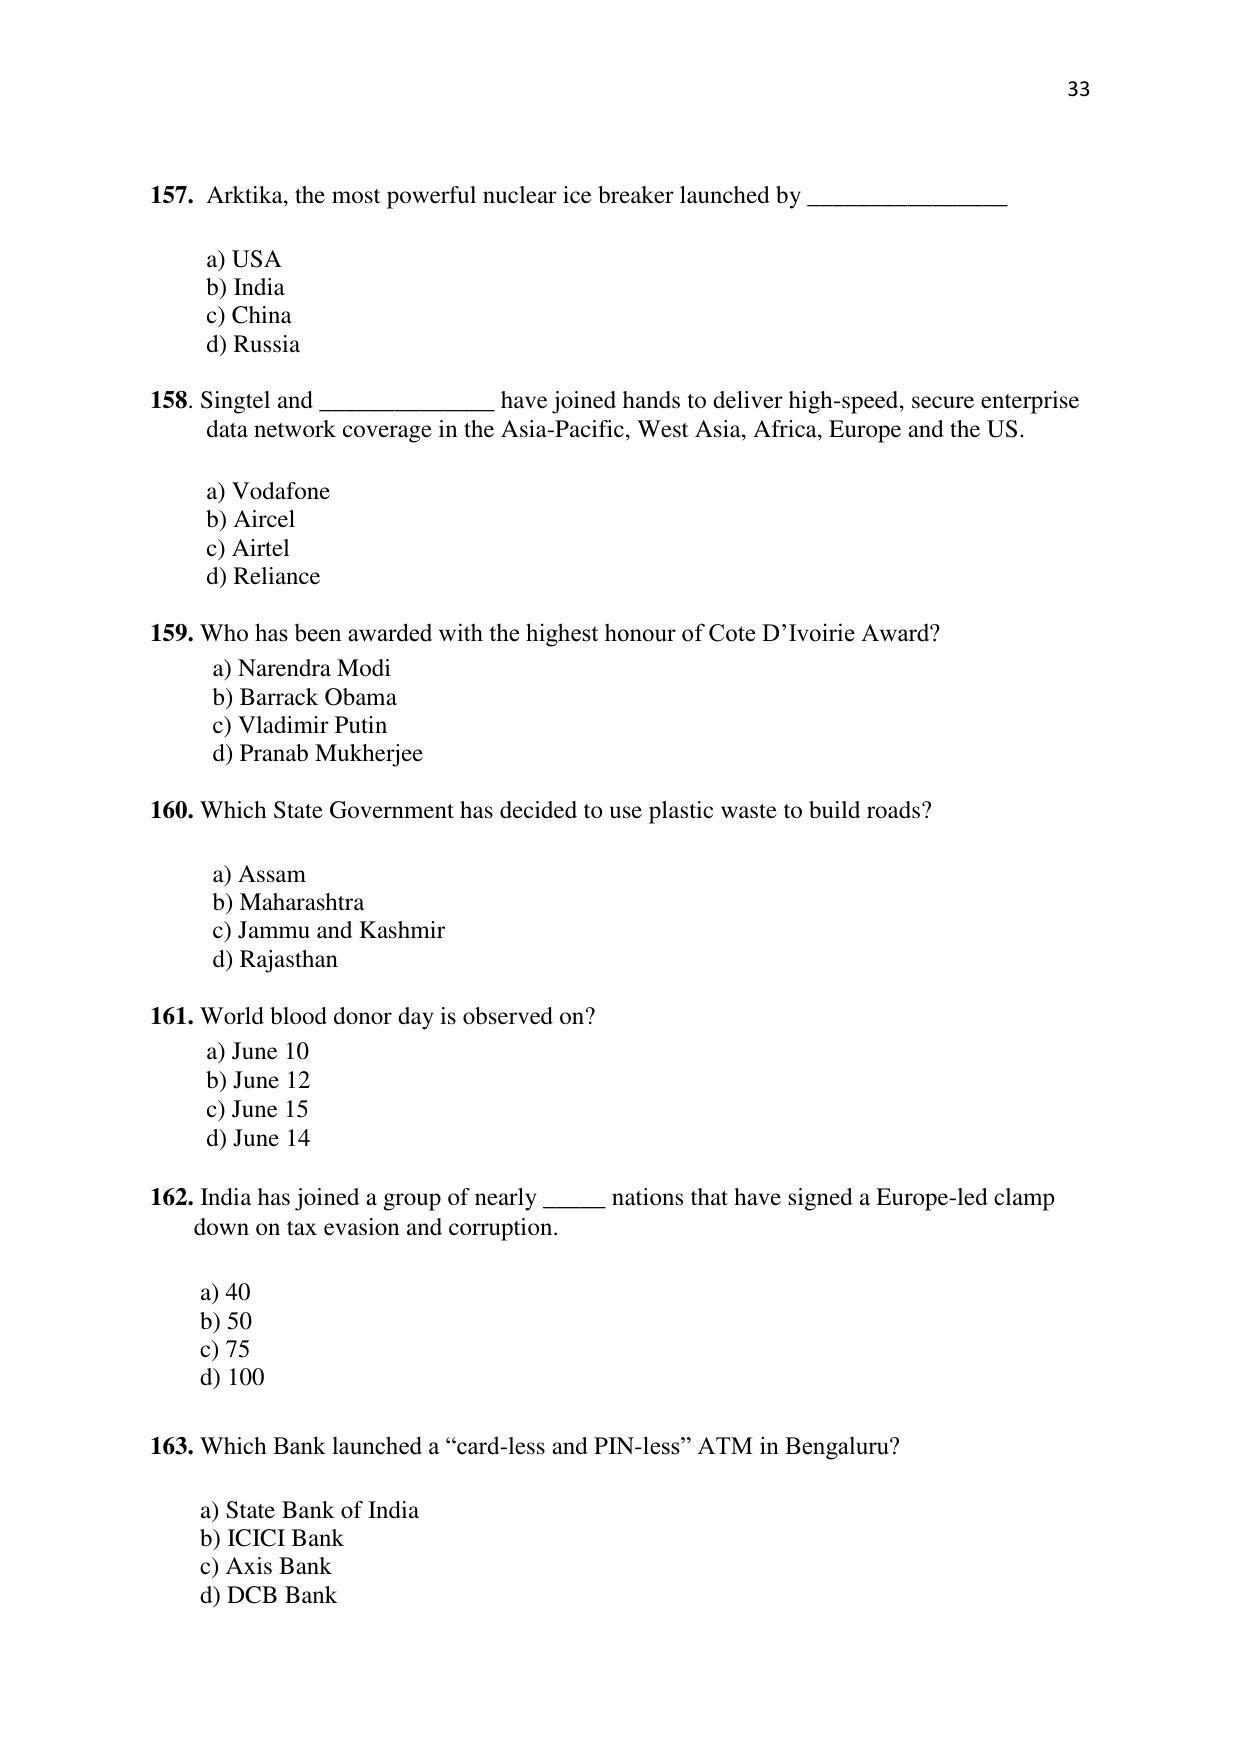 KMAT Question Papers - November 2016 - Page 33